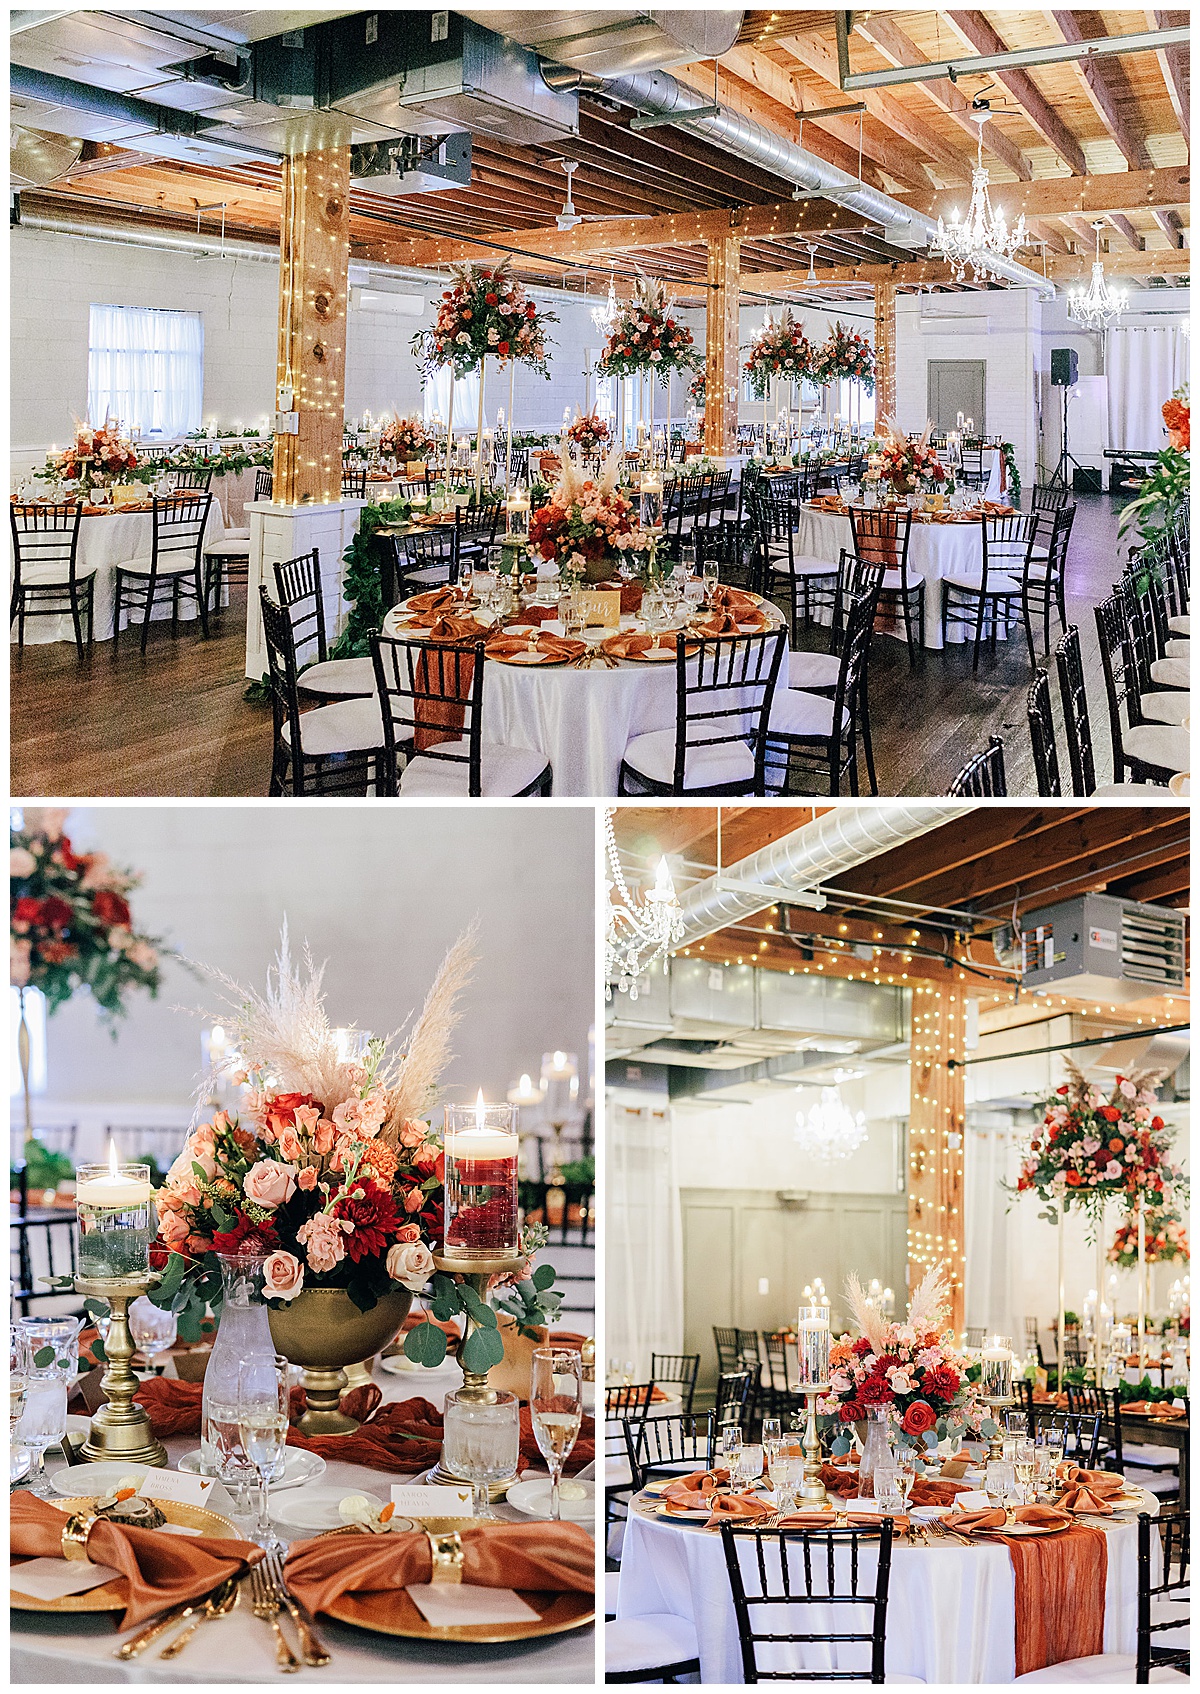  reception day with beautiful florals by Kayla Bouren Photography